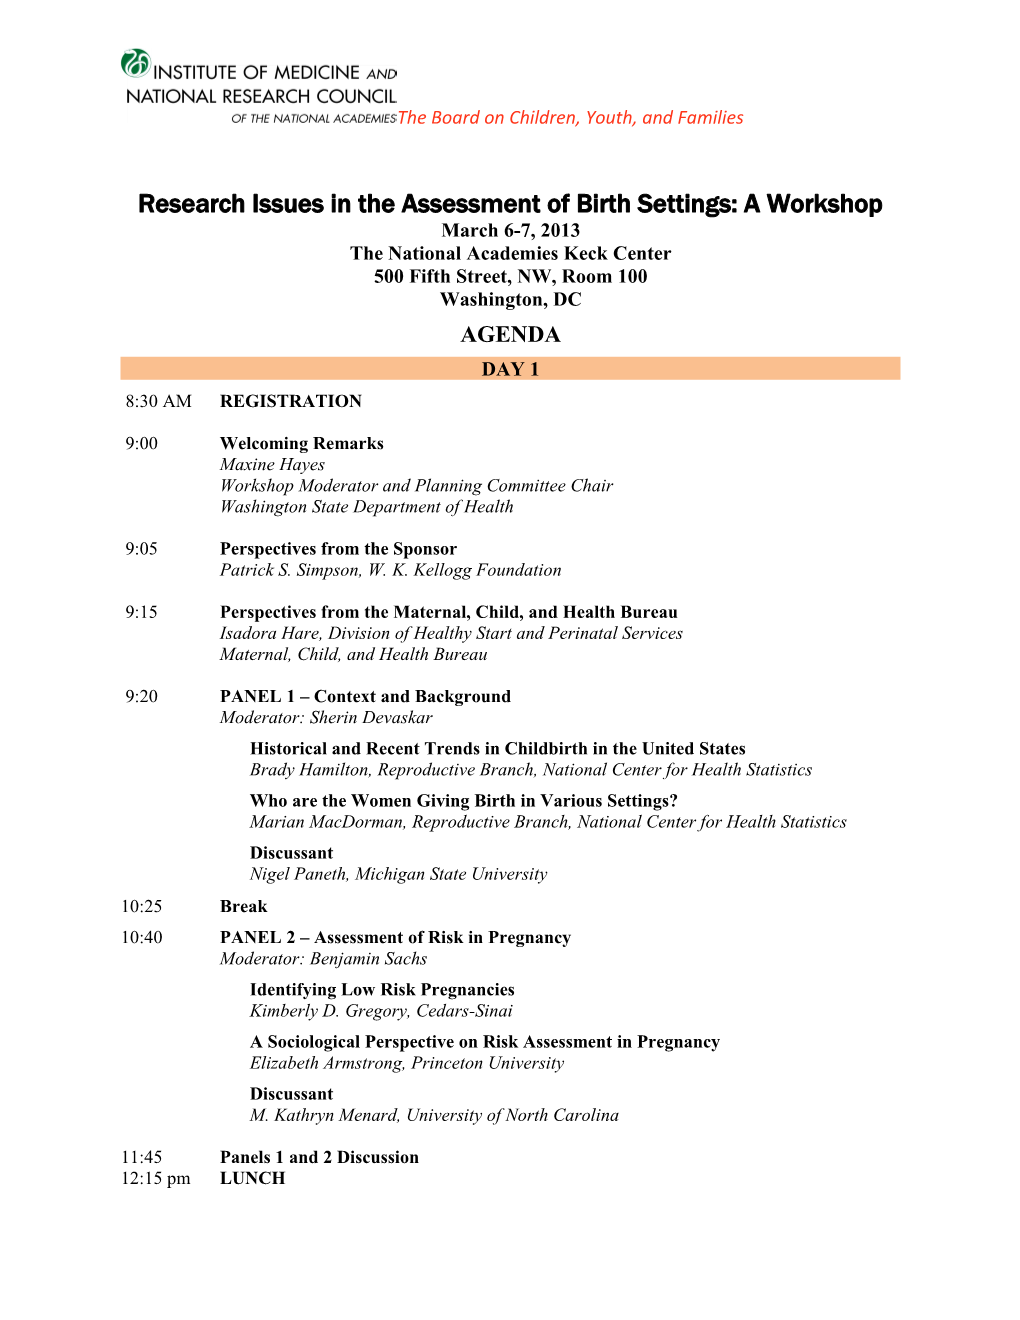 Research Issues in the Assessment of Birth Settings: a Workshop